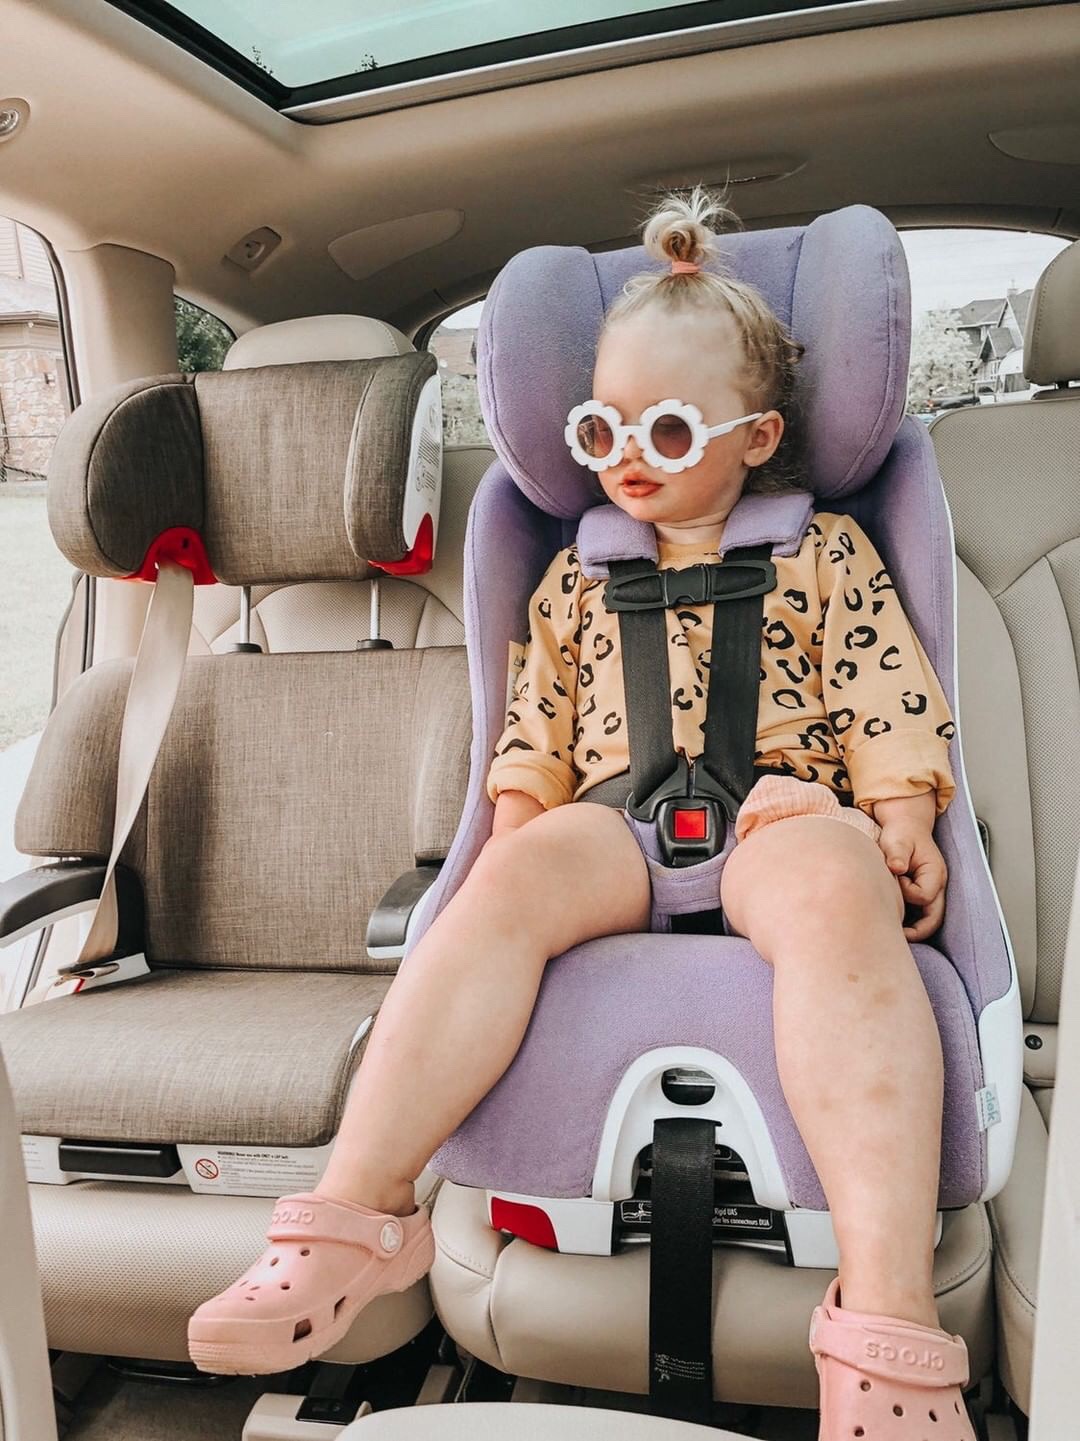 safest convertible car seat 2019 consumer reports